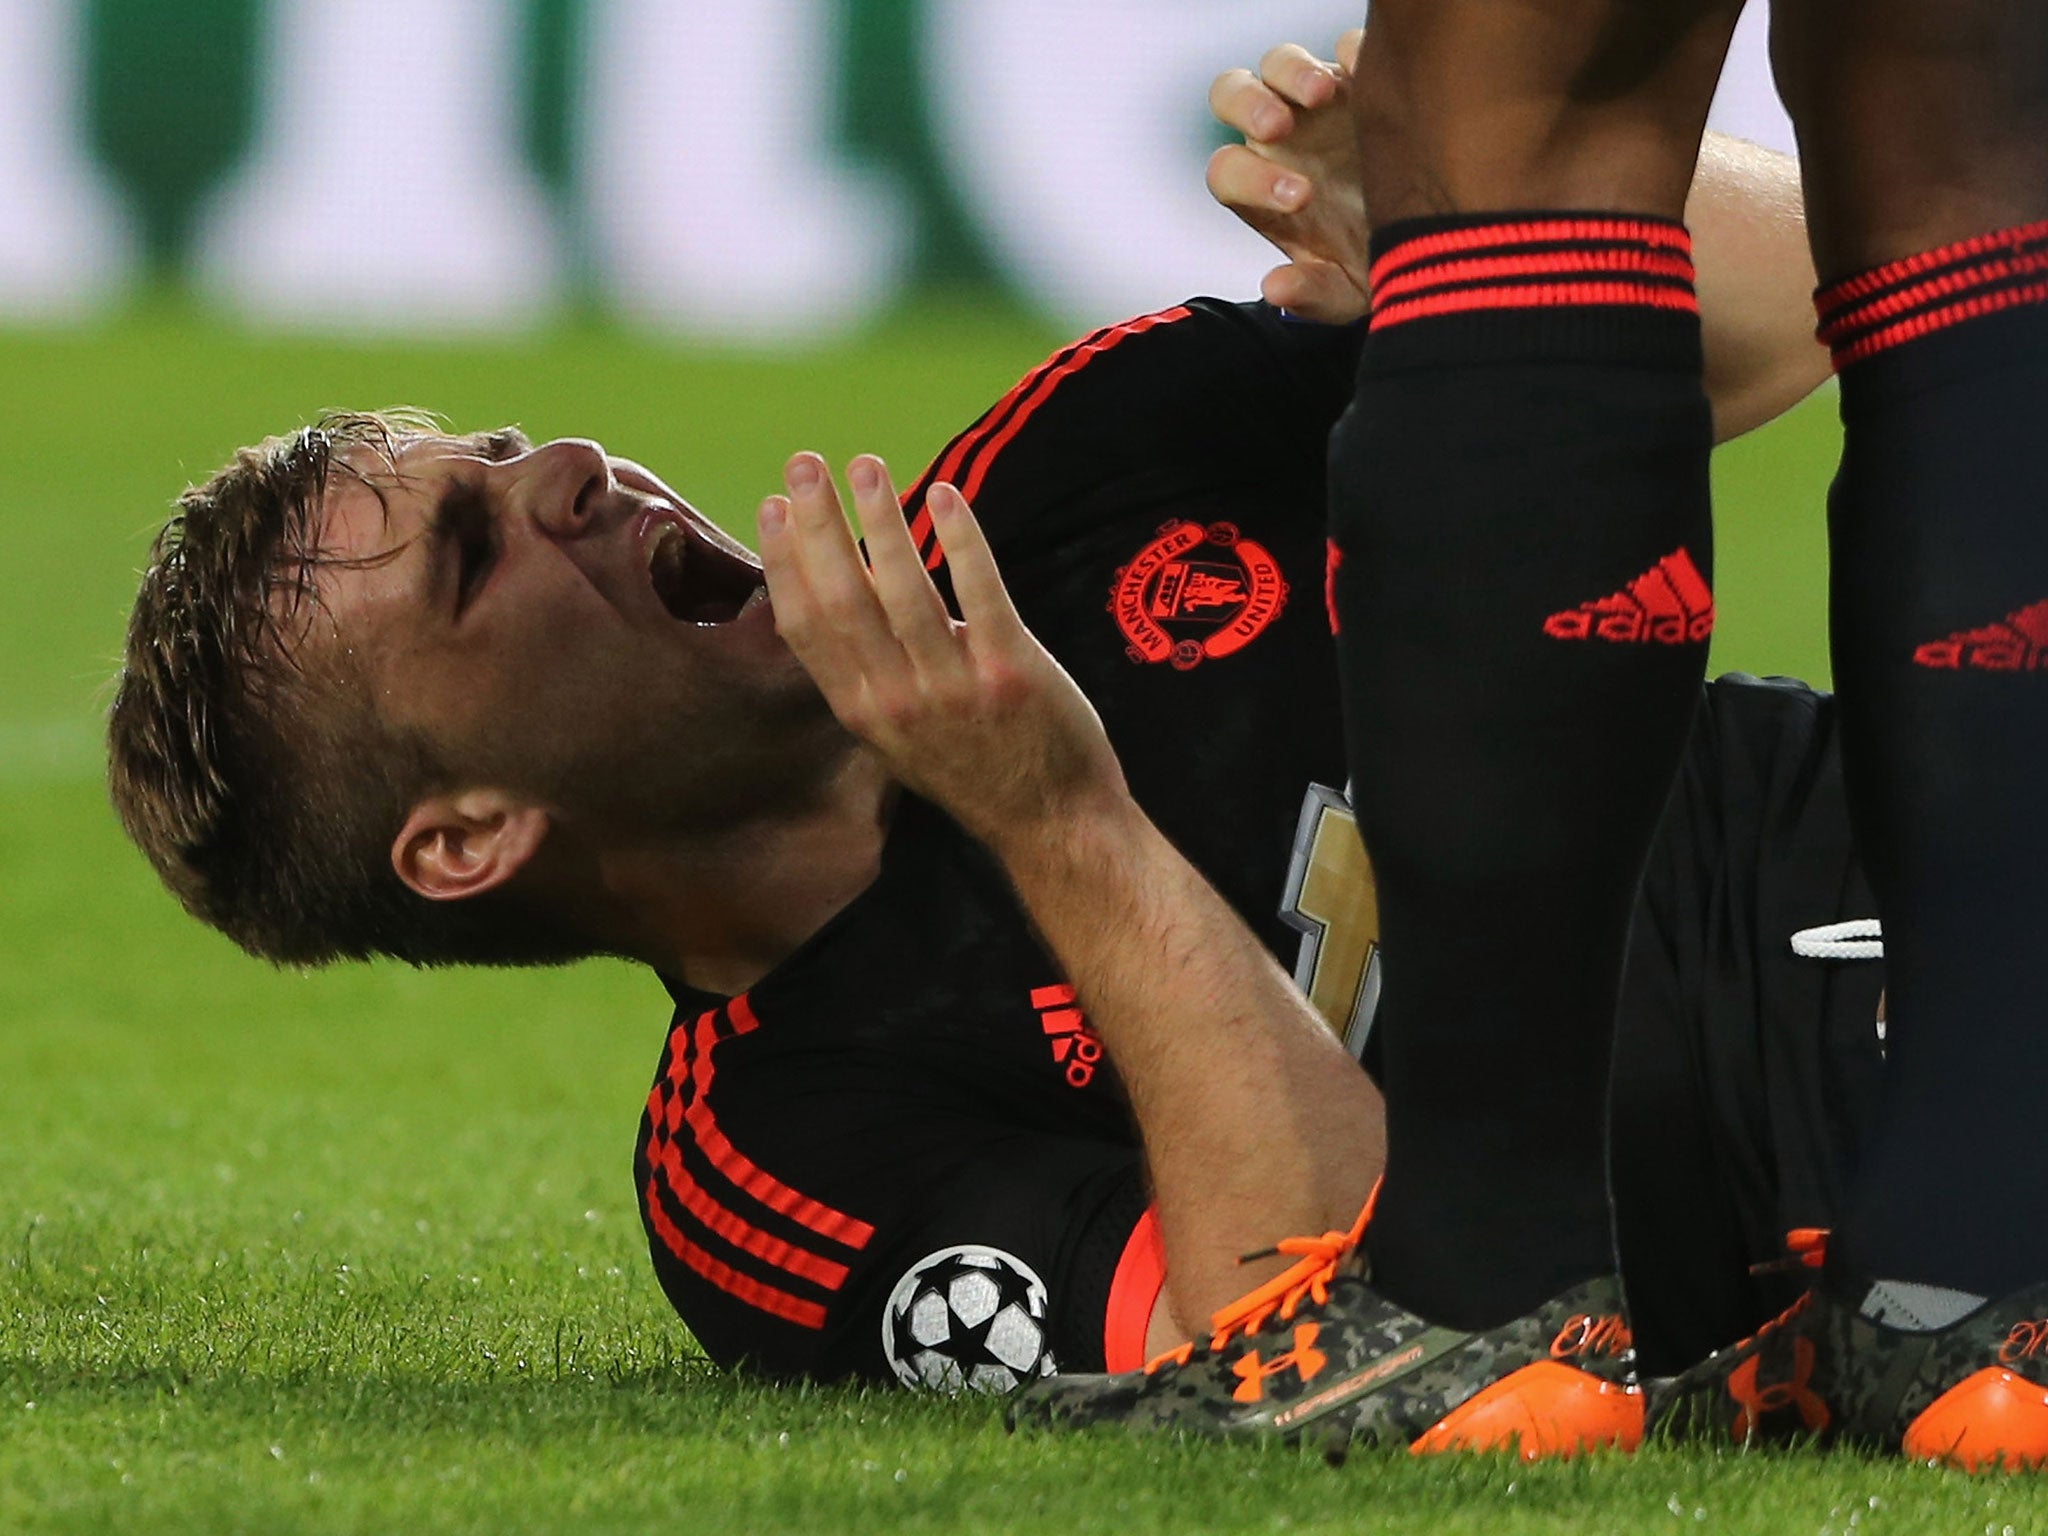 Luke Shaw reacts after breaking his leg against PSV